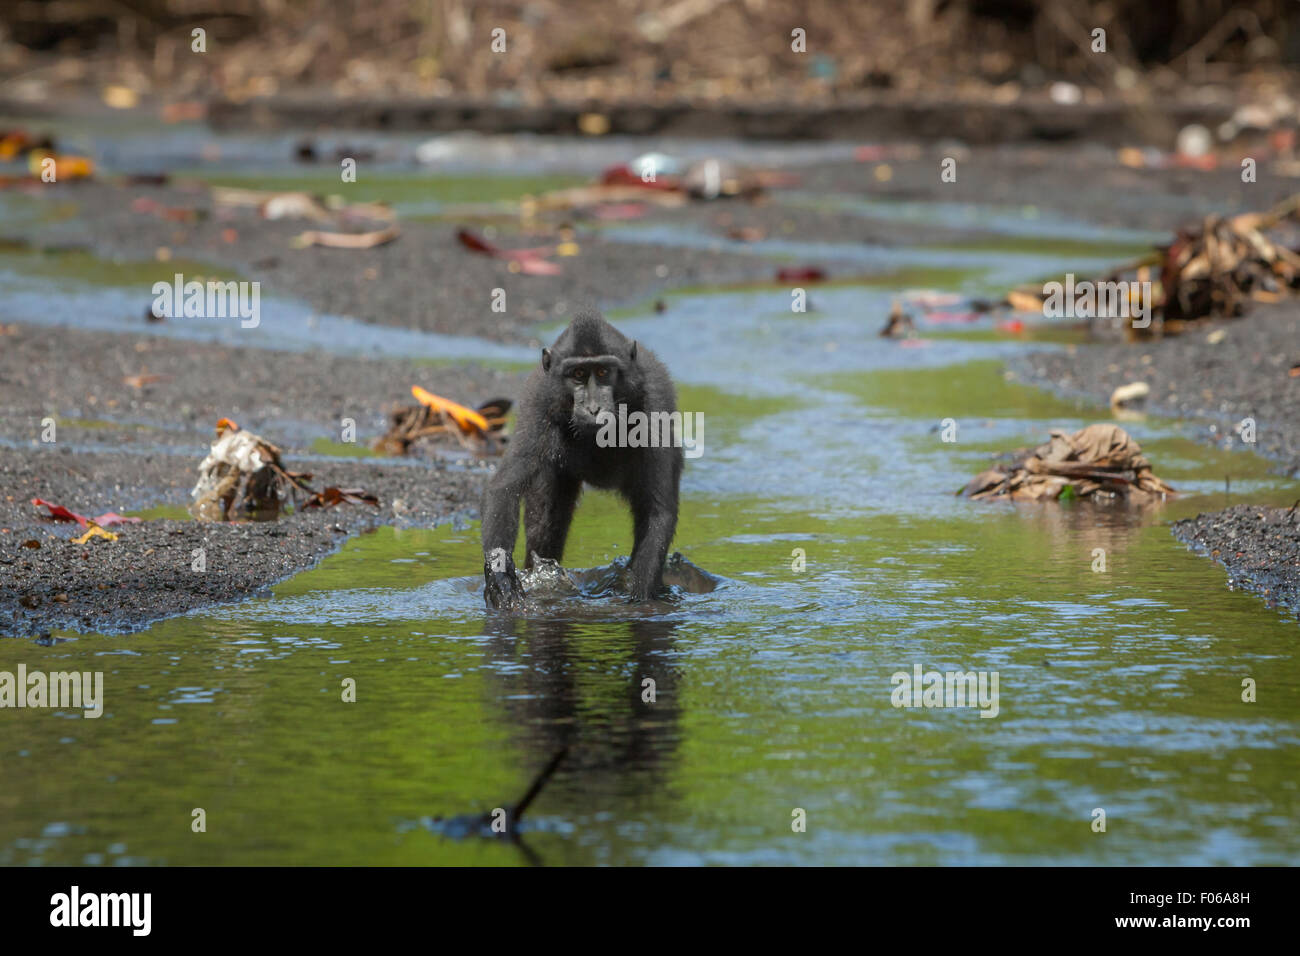 A Sulawesi black-crested macaque (Macaca nigra) is playing on a stream in Tangkoko Nature Reserve, North Sulawesi, Indonesia. Stock Photo